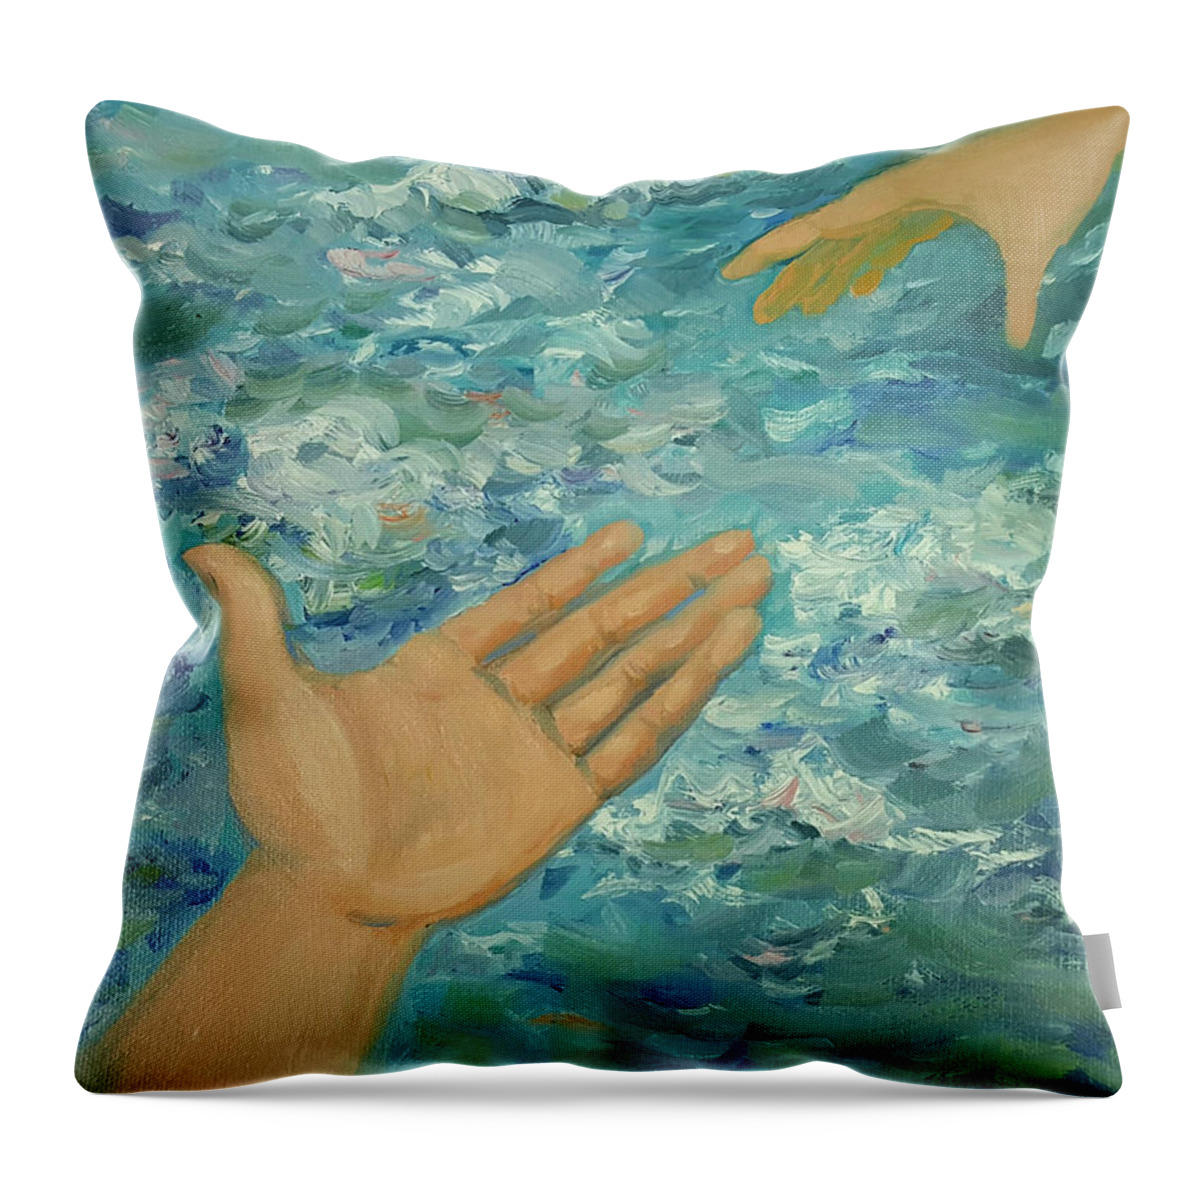 Jesus Throw Pillow featuring the painting Come by Sharon Casavant